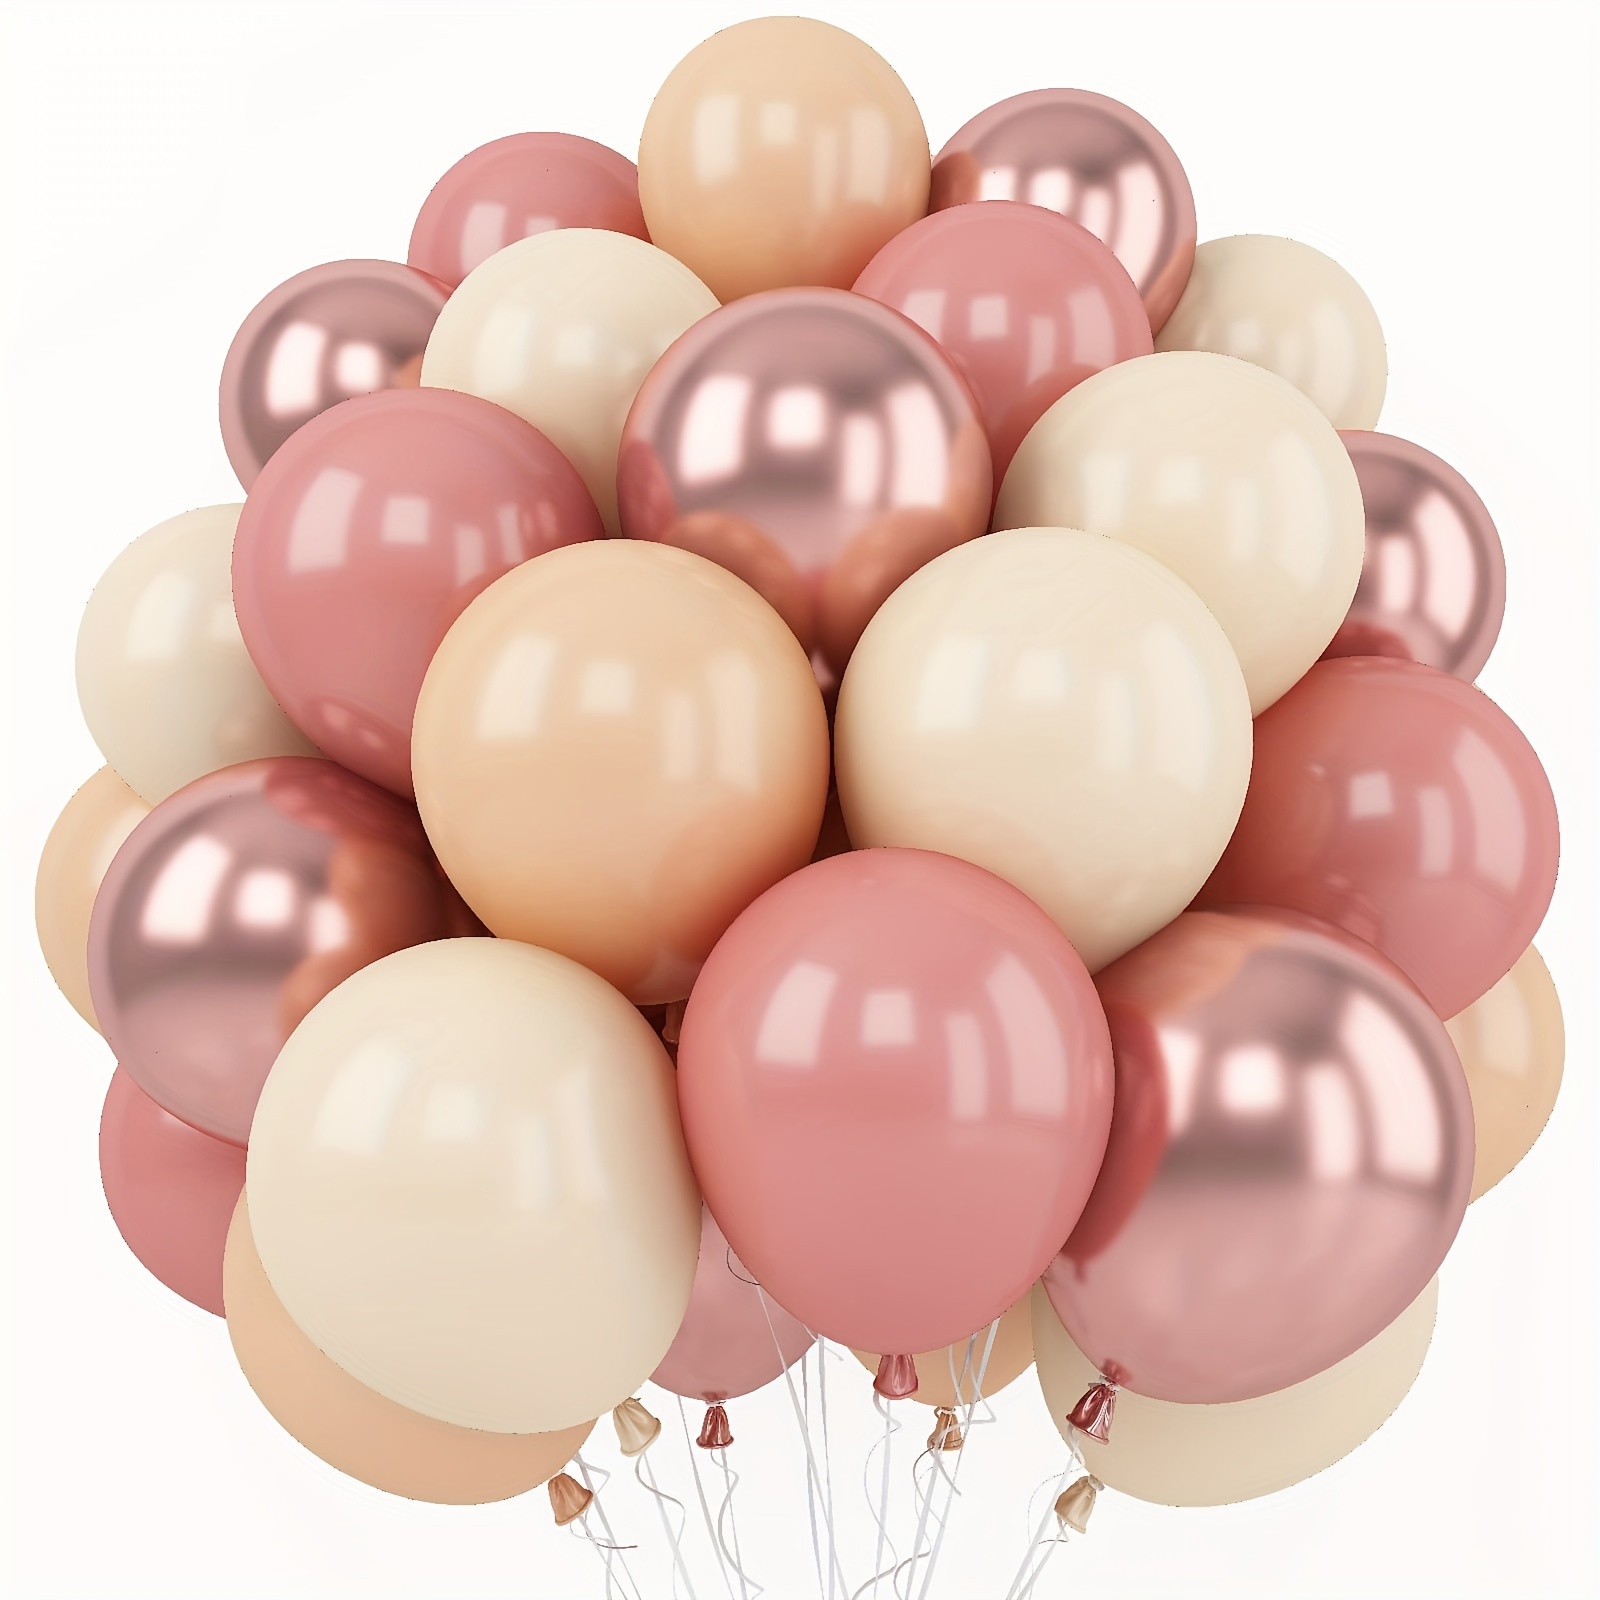 

40-pack Blush Pink Balloons Set For Wedding, Valentine's Day, Bridal Shower, Birthday, Anniversary - Emulsion Material, No Electricity Needed, Ideal For Indoor & Outdoor Decor, For Ages 3-12 Years